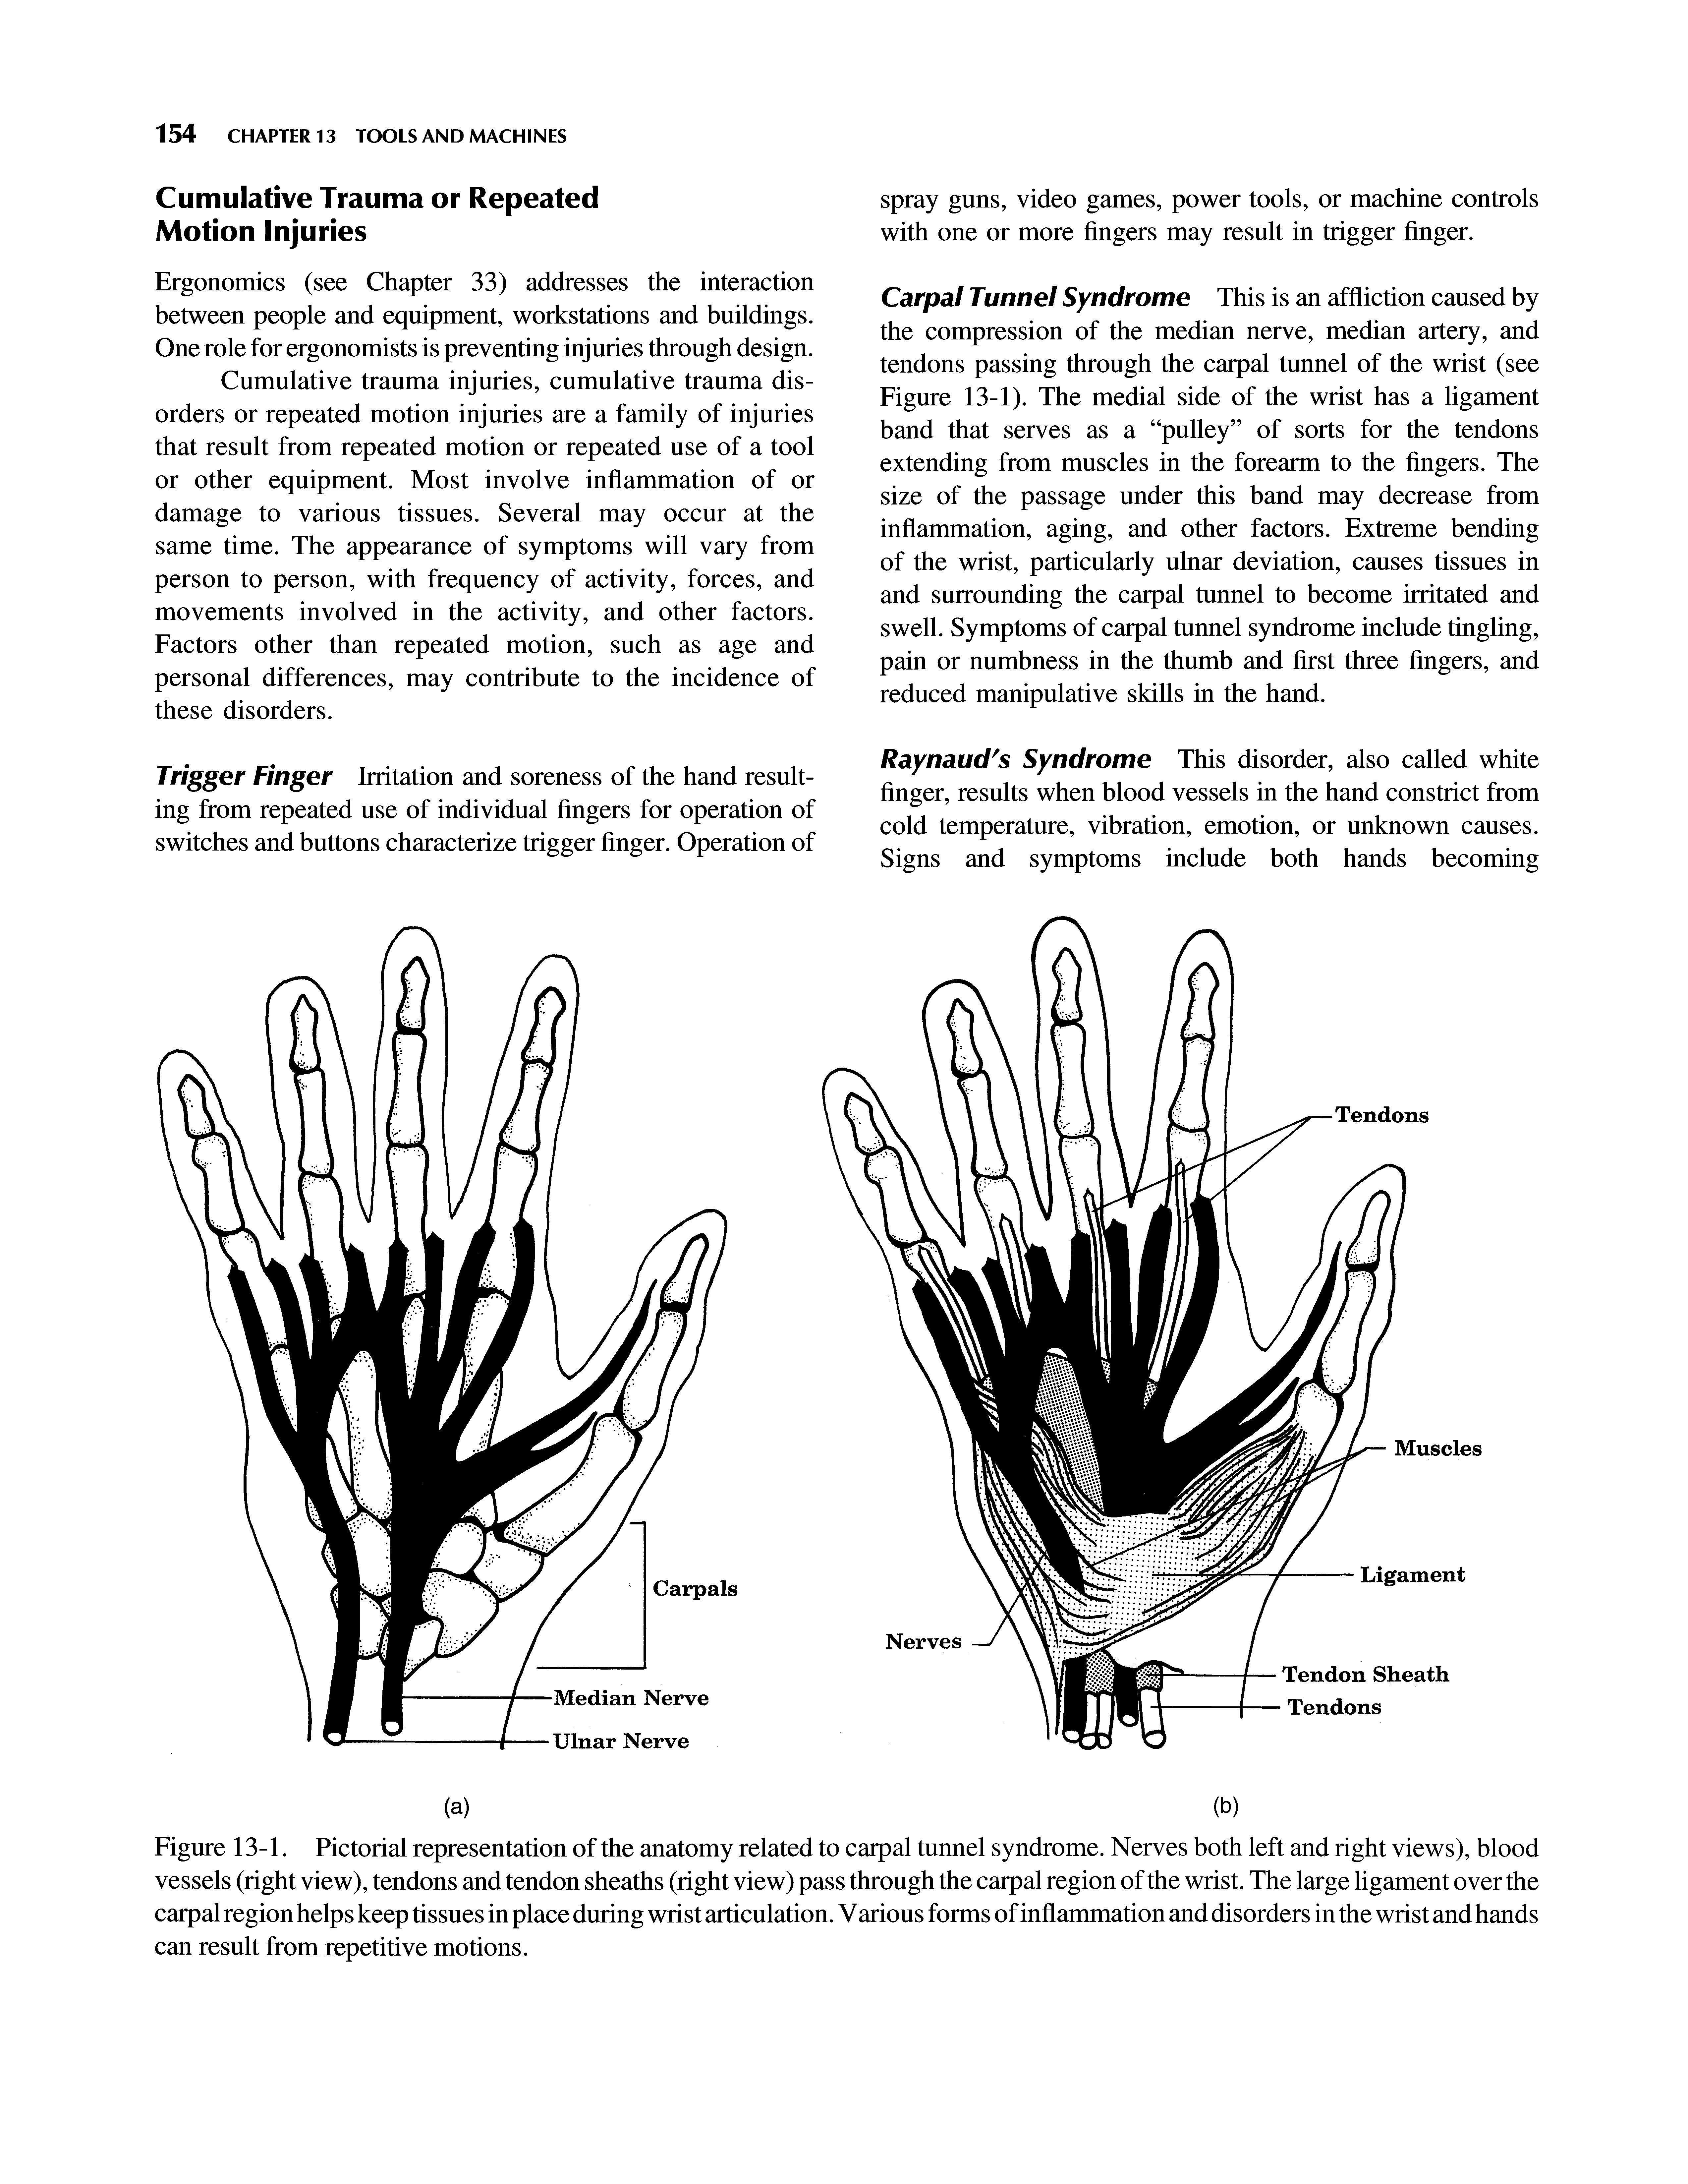 Figure 13-1. Pictorial representation of the anatomy related to carpal tunnel syndrome. Nerves both left and right views), blood vessels (right view), tendons and tendon sheaths (right view) pass through the carpal region of the wrist. The large ligament over the carpal region helps keep tissues in place during wrist articulation. V arious forms of inflammation and disorders in the wrist and hands can result from repetitive motions.